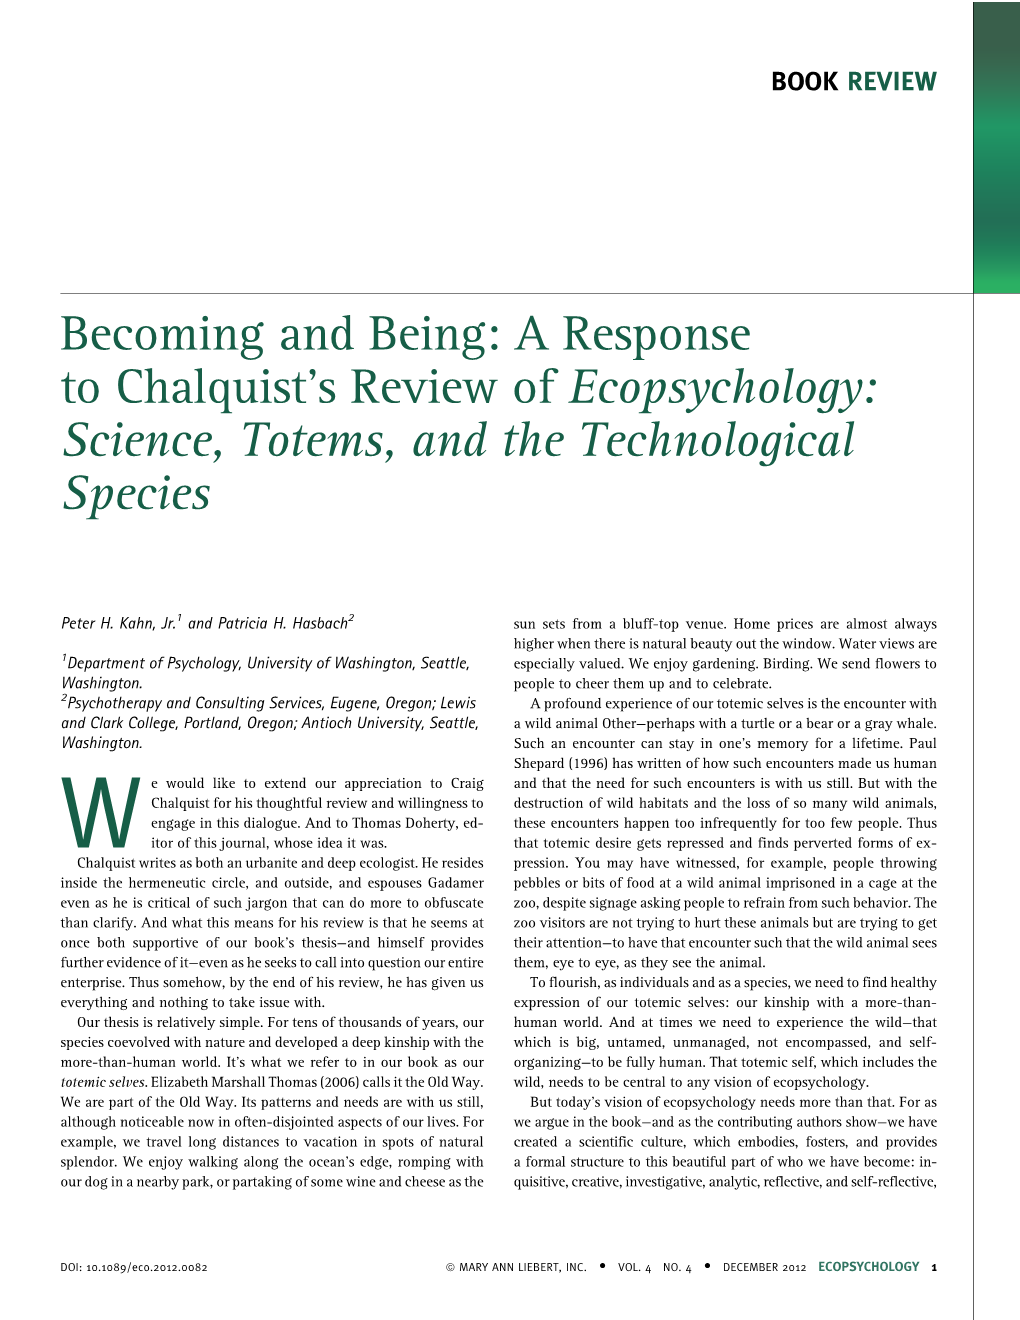 Becoming and Being: a Response to Chalquist's Review of Ecopsychology